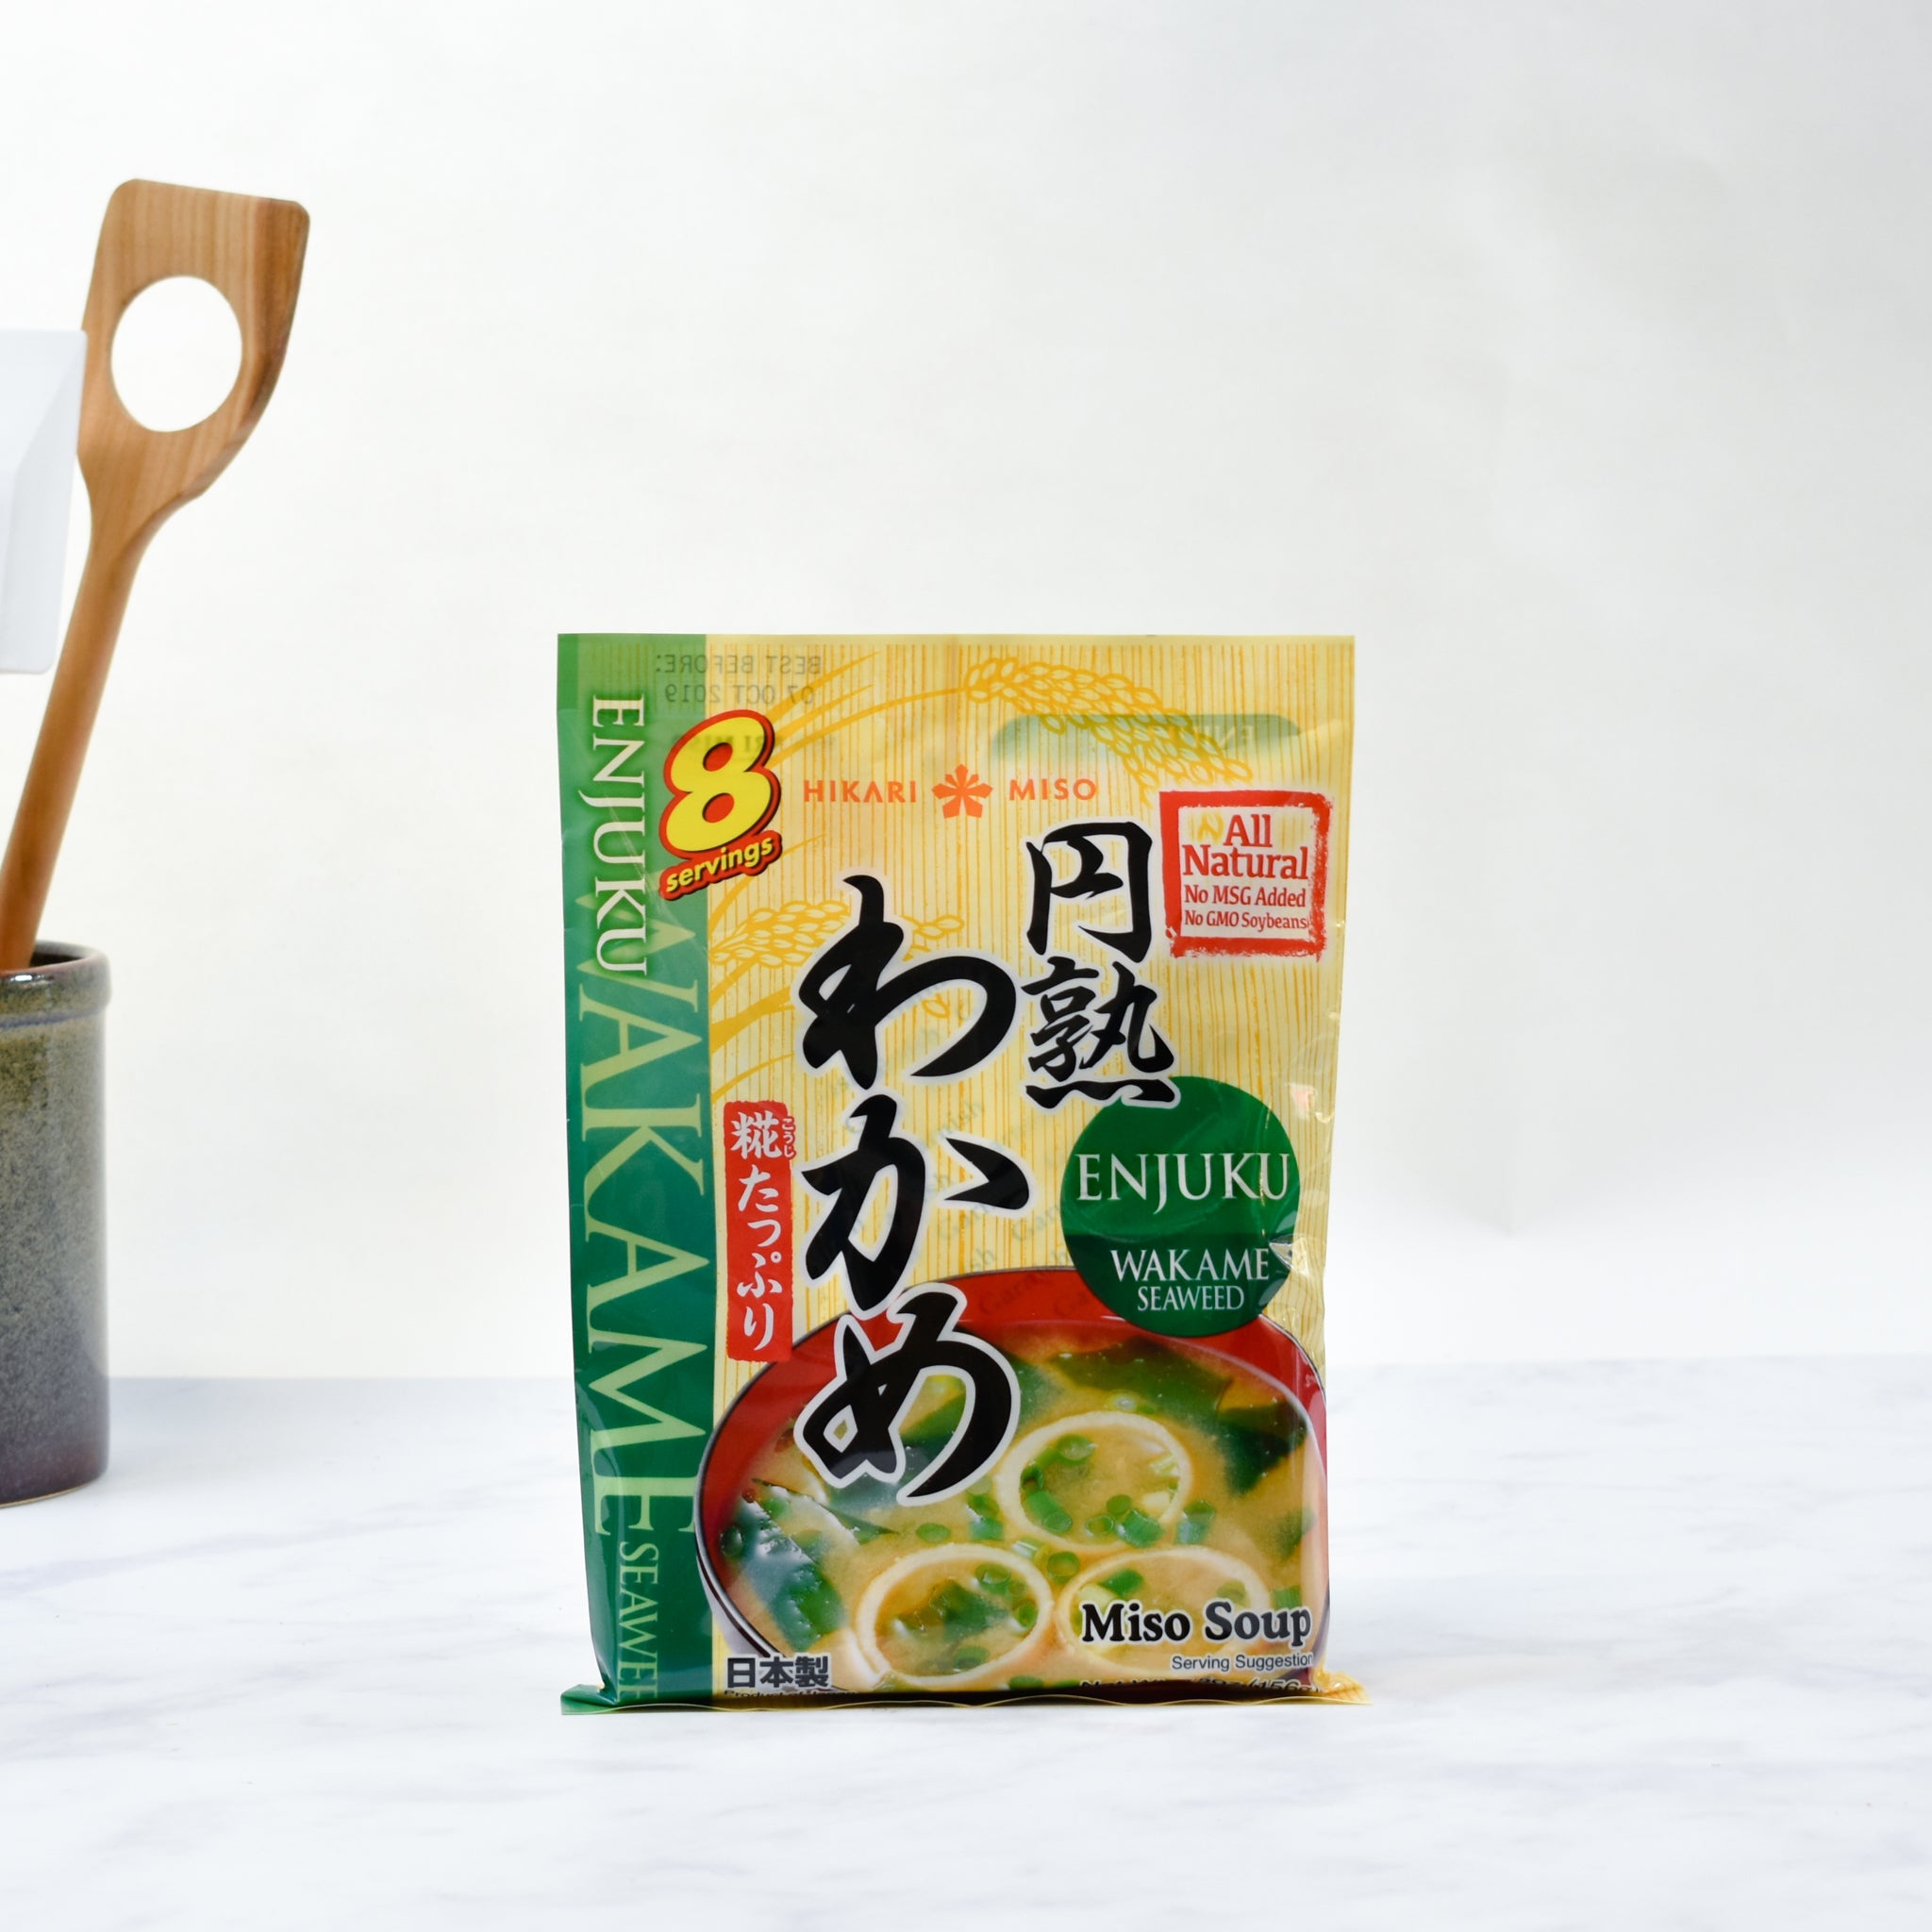 Instant Miso Soup With Wakame, 8 x 22g servings